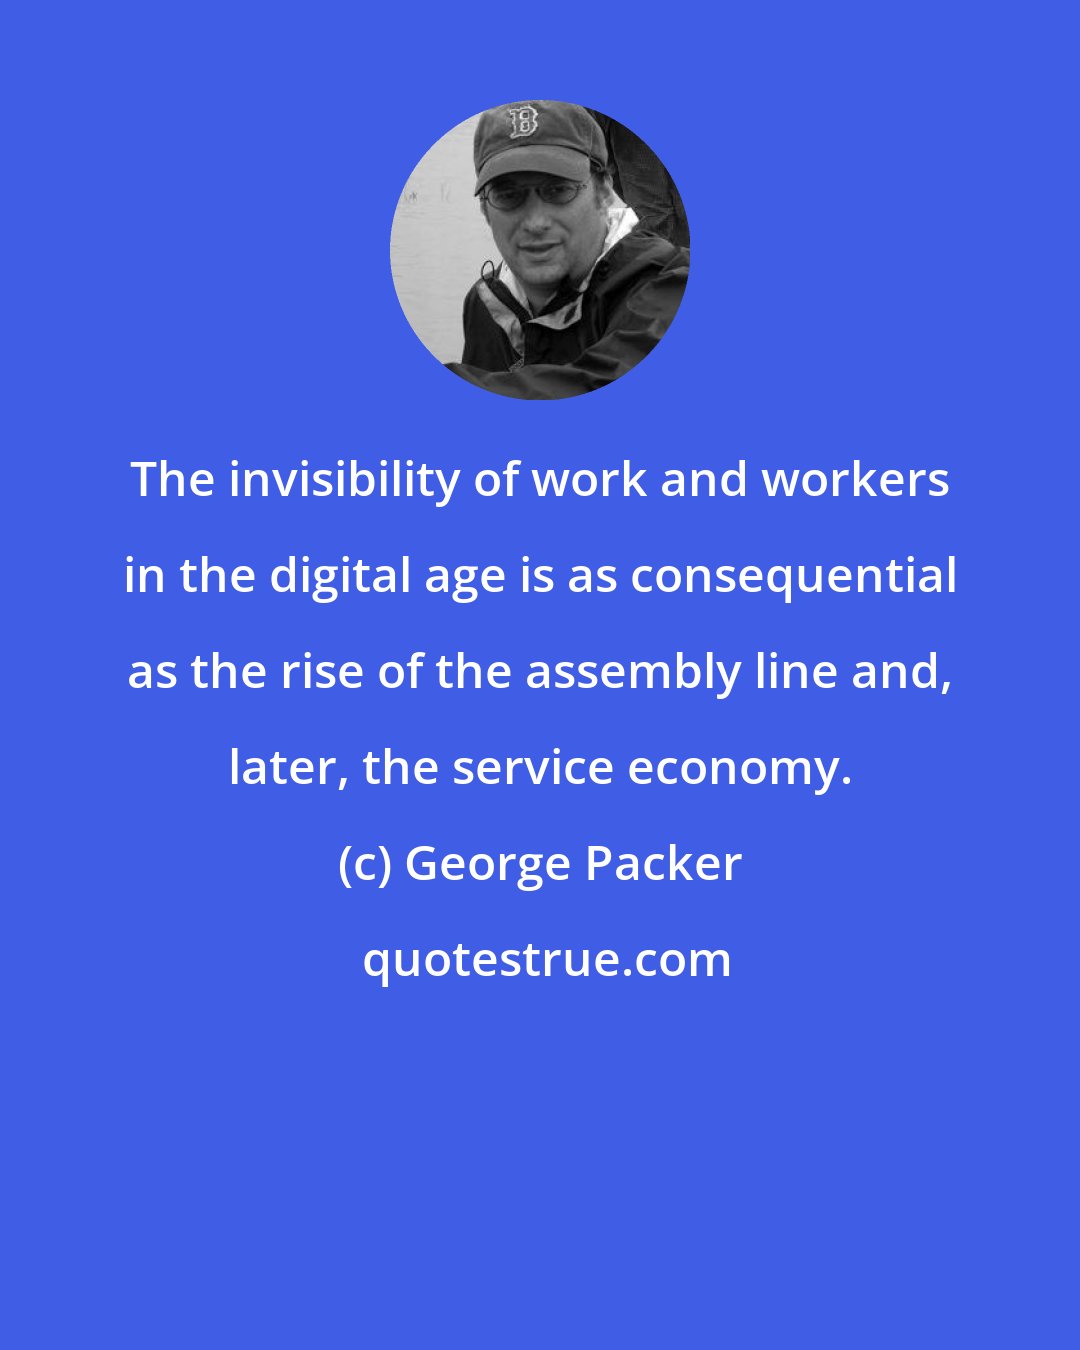 George Packer: The invisibility of work and workers in the digital age is as consequential as the rise of the assembly line and, later, the service economy.